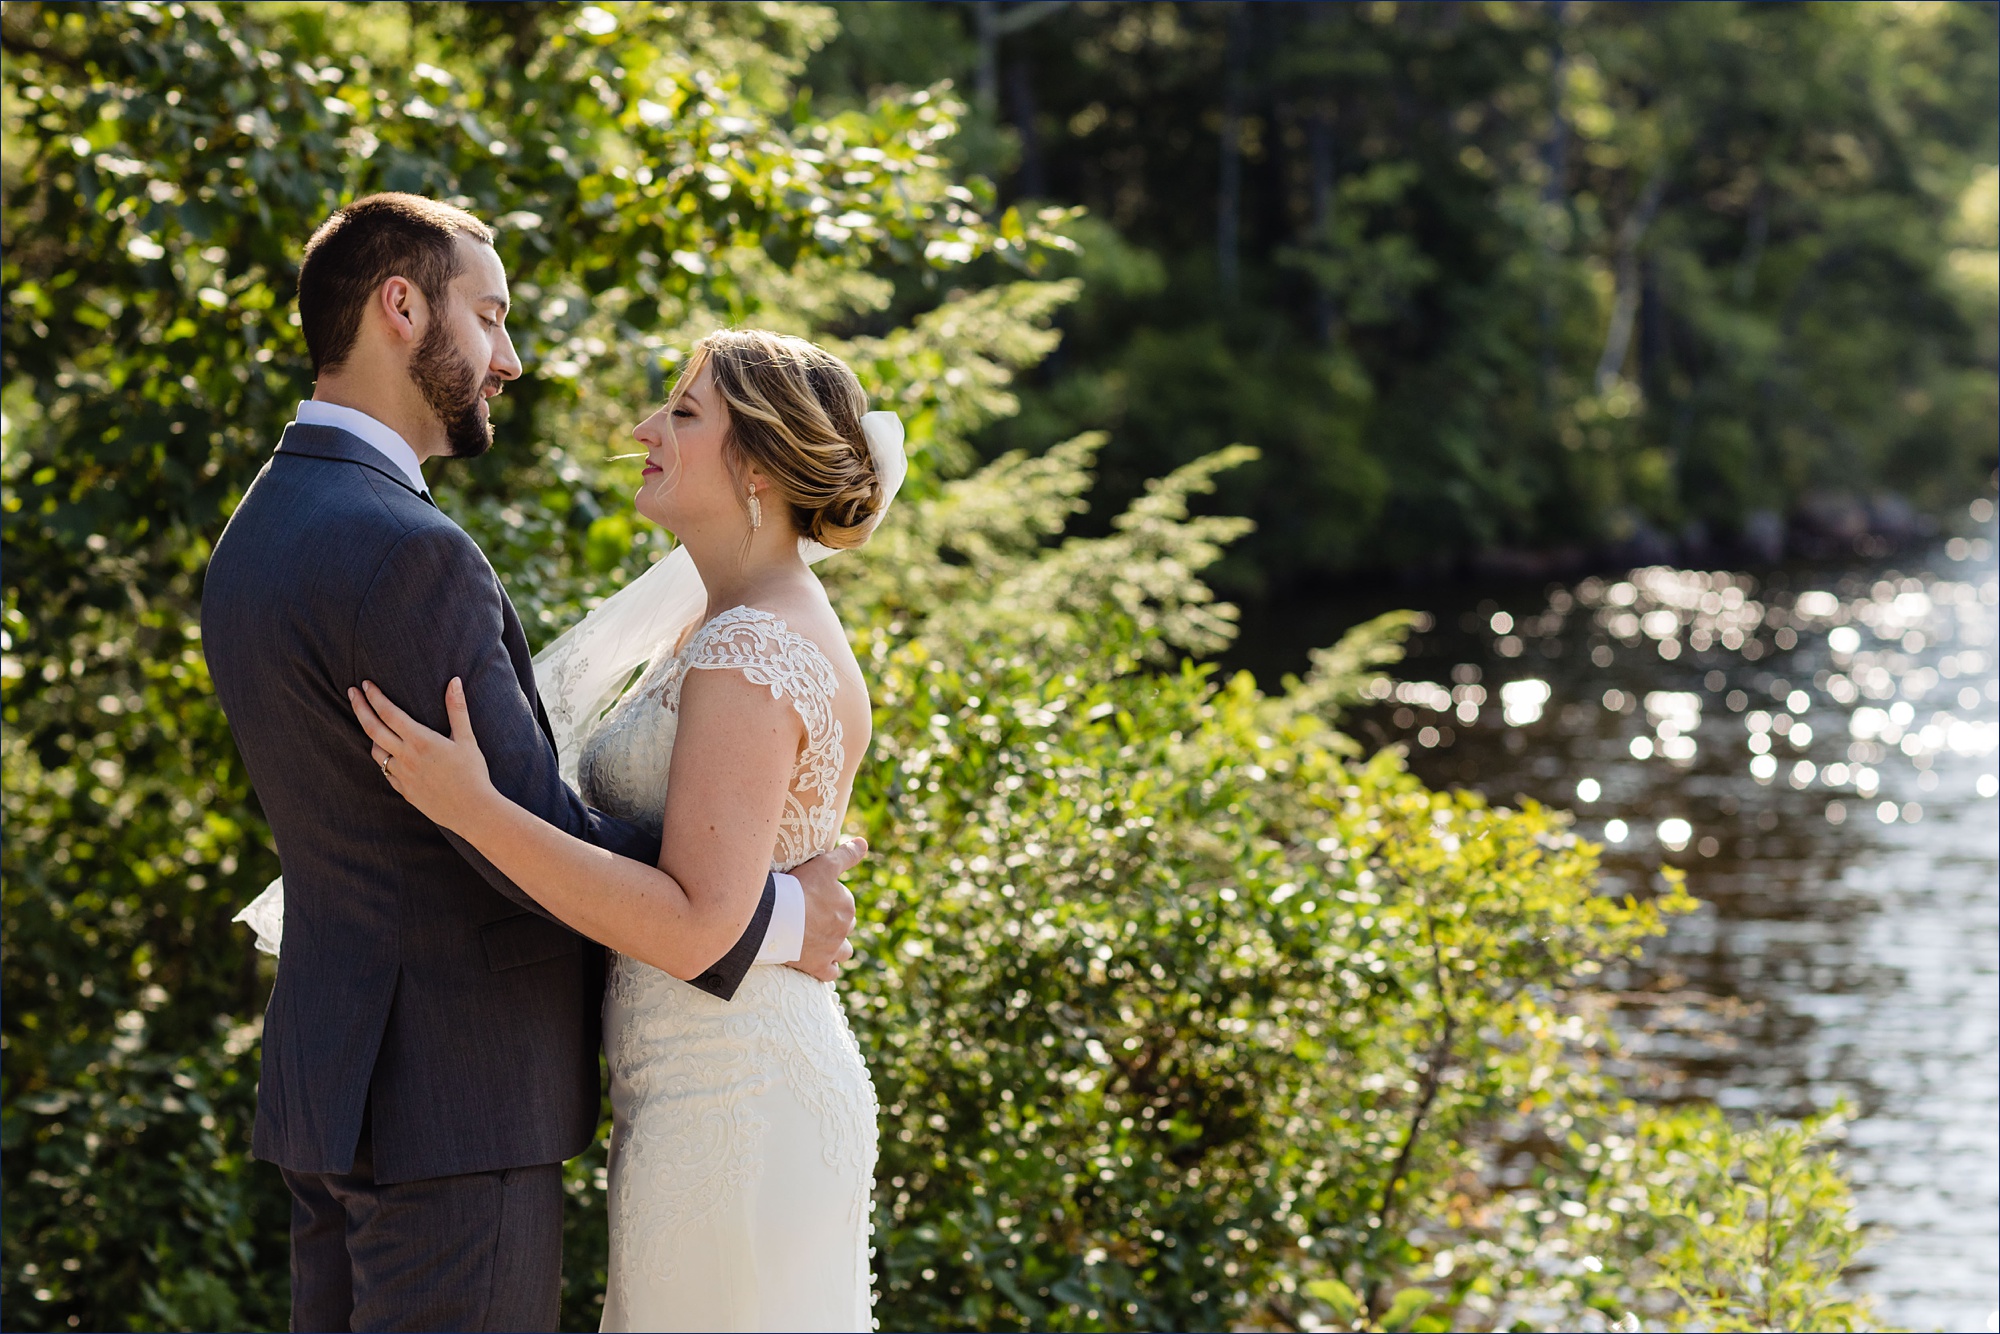 The newlyweds enjoy a quiet bit of time together at The Preserve at Chocorua NH